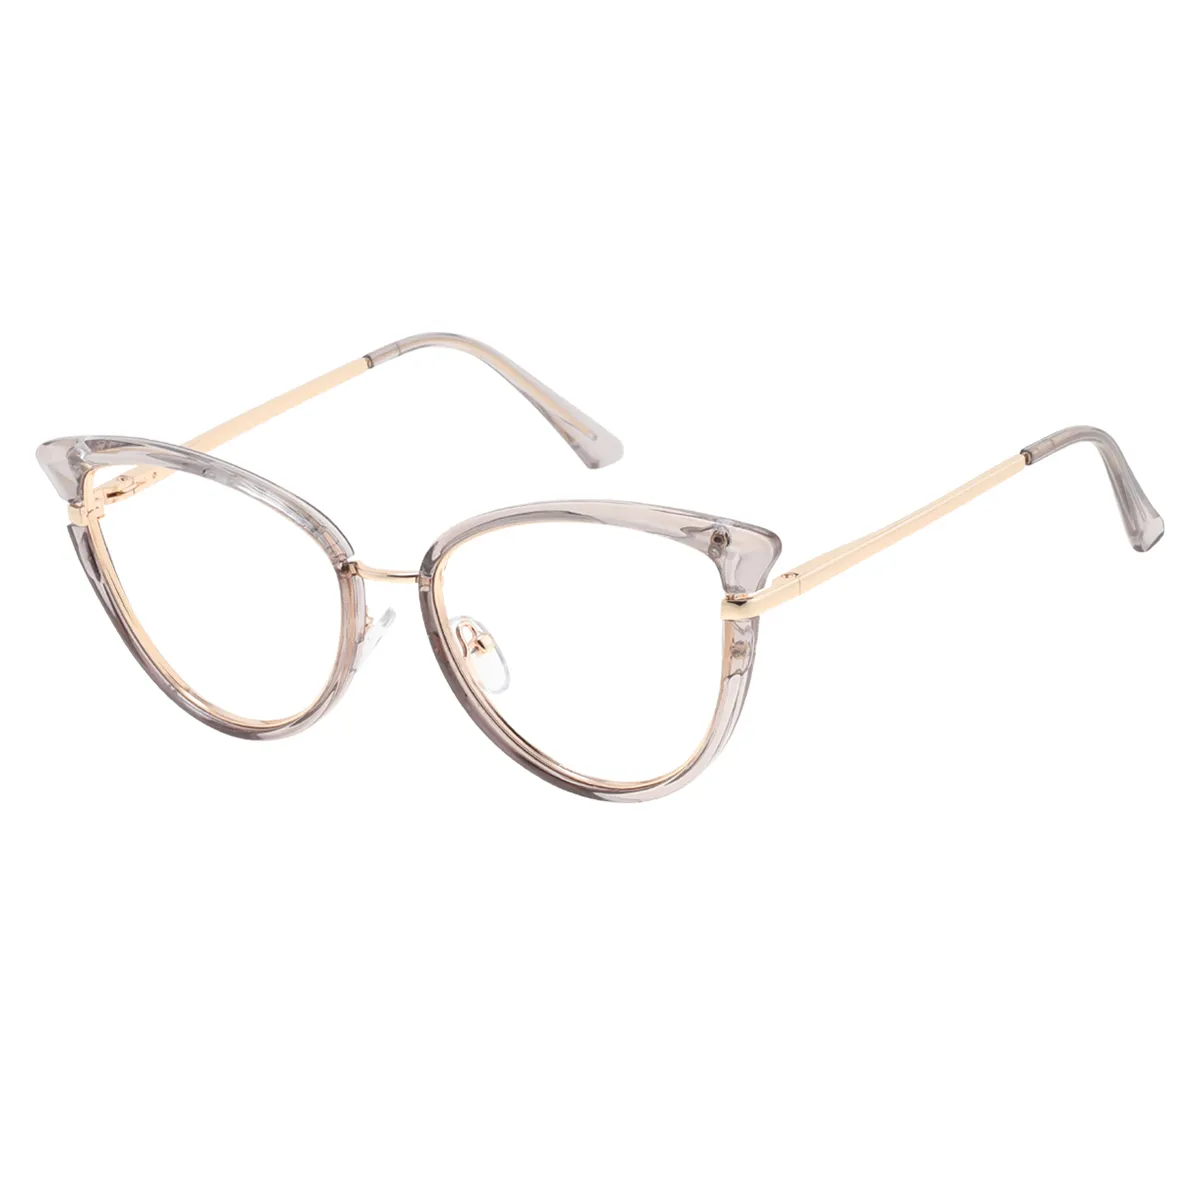 Griffin - Cat-eye Wood Texture Glasses for Women - EFE